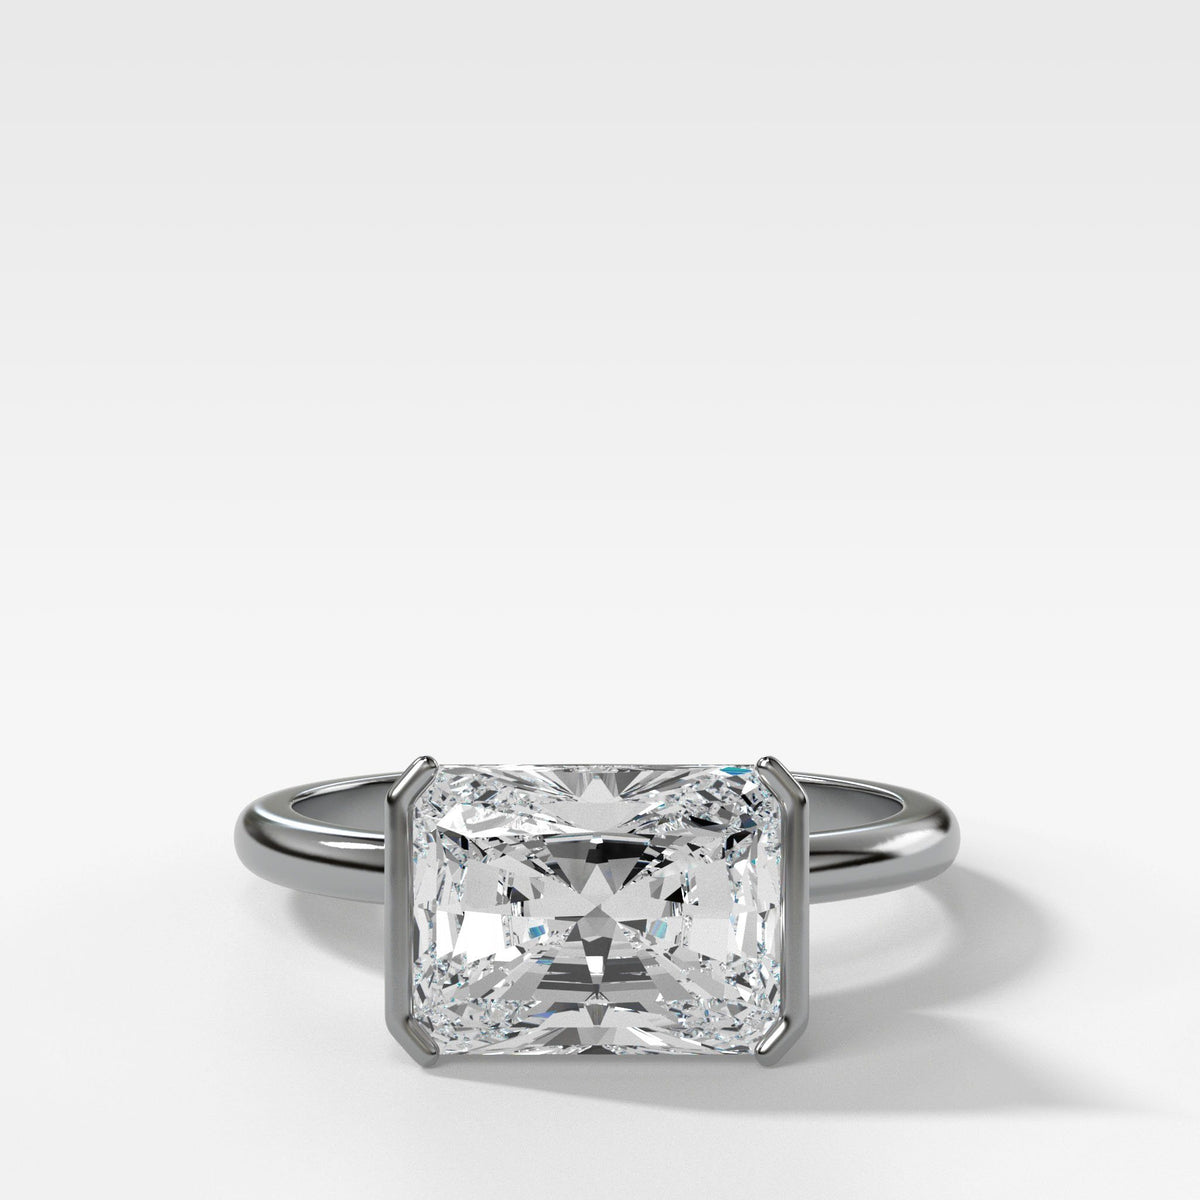 Half Bezel Solitaire Engagement ring with Elongated Radiant Cut by Good Stone in White Gold